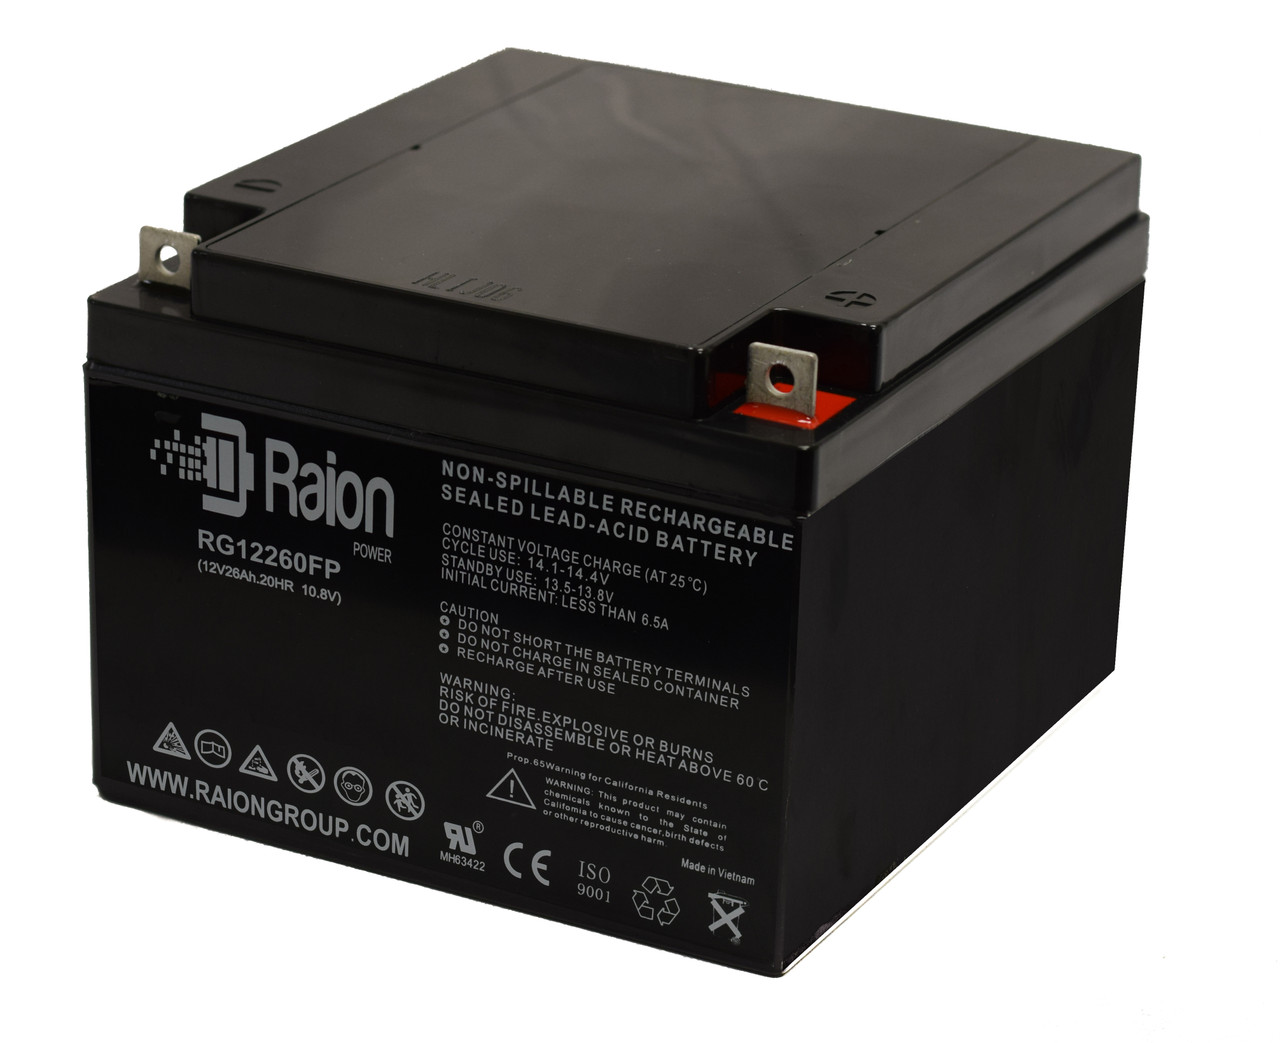 Raion Power Replacement 12V 26Ah Battery for NPP Power NP12-24Ah - 1 Pack